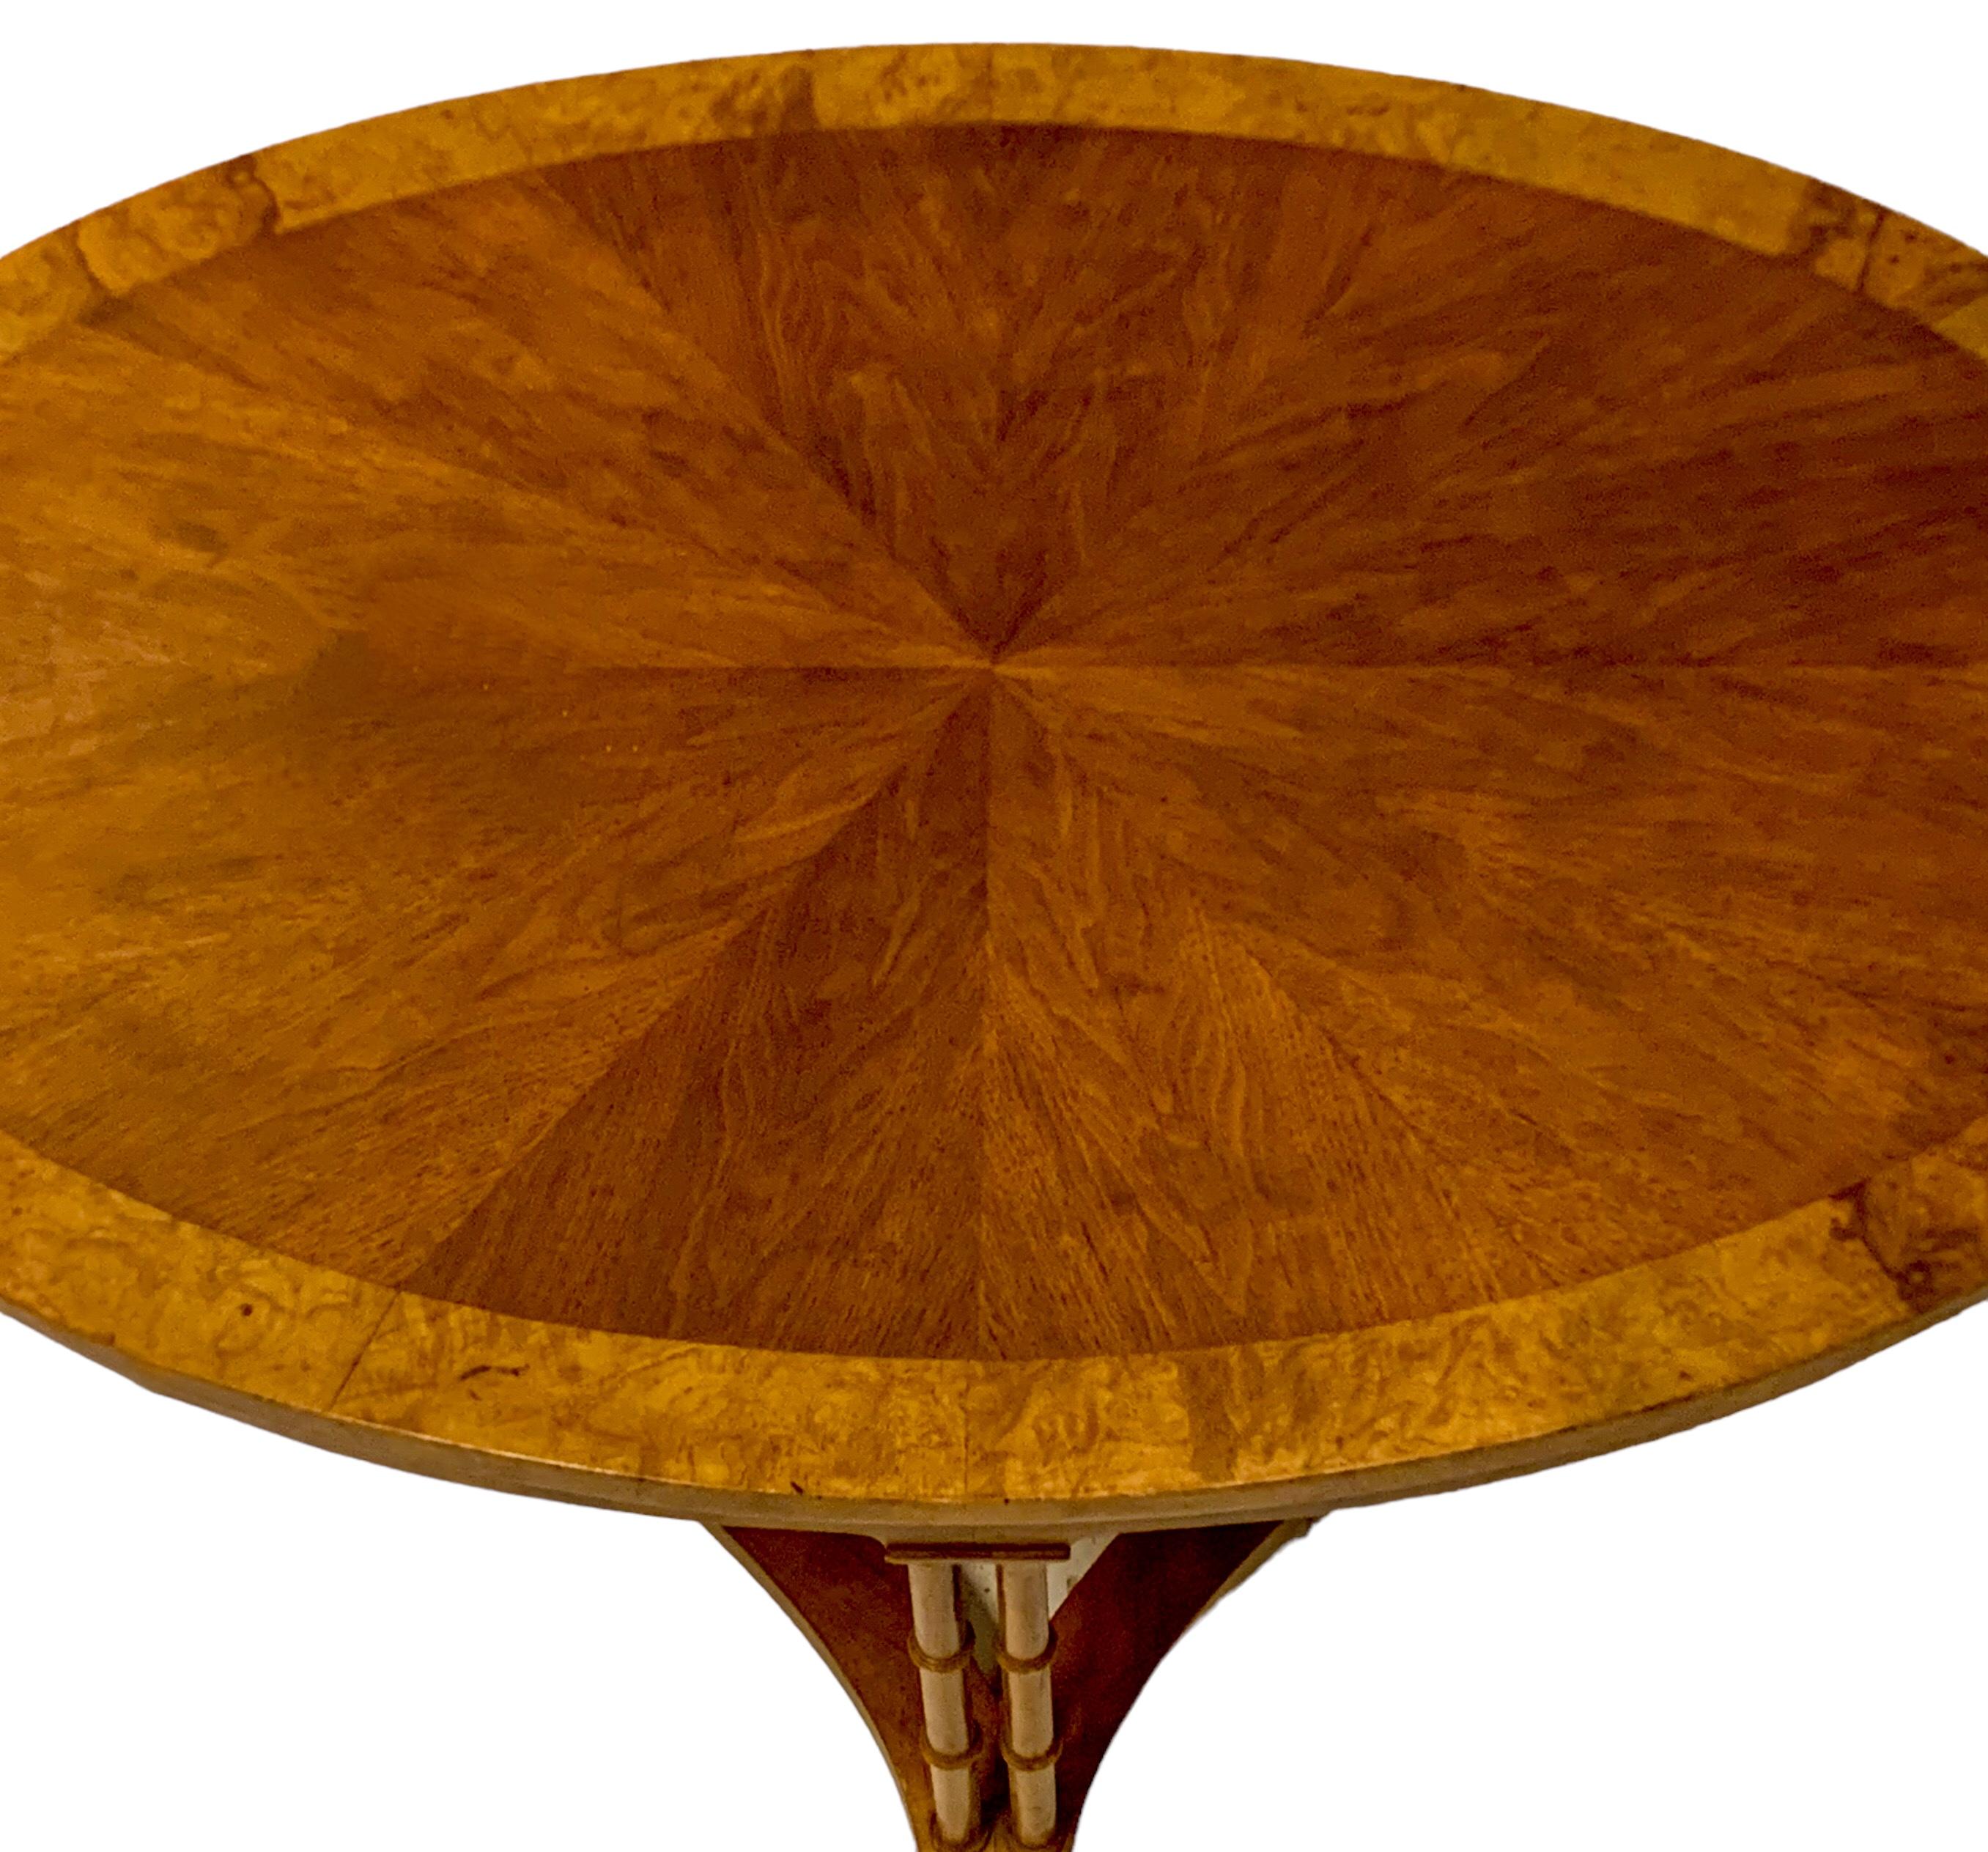 Baker Furniture Regency Style Burl Walnut Inlaid Faux Bamboo Coffee Table In Good Condition For Sale In Kennesaw, GA